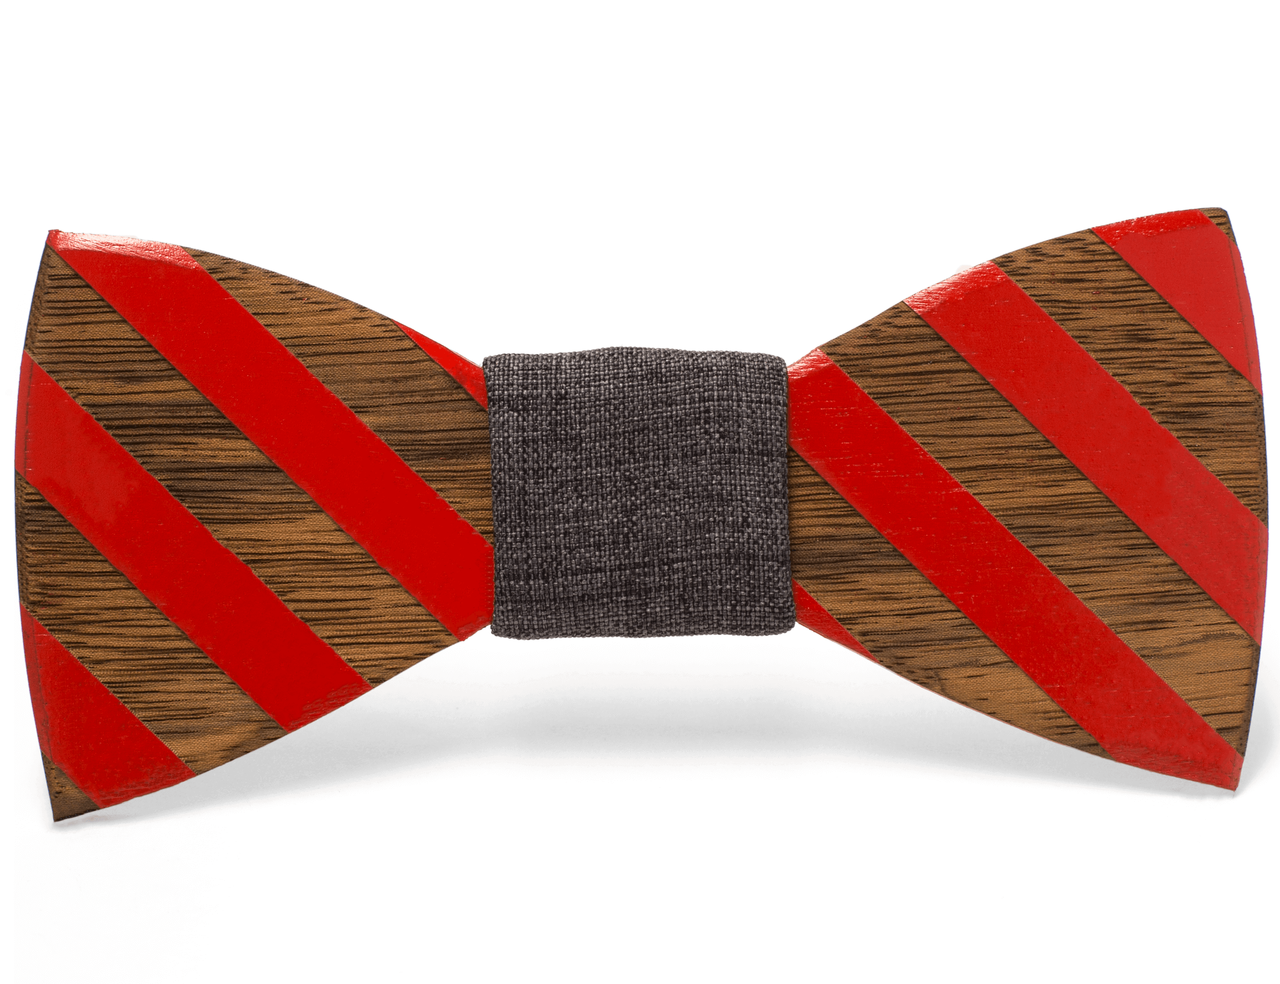 Wooden Bow Ties - Two Guys Bow Ties